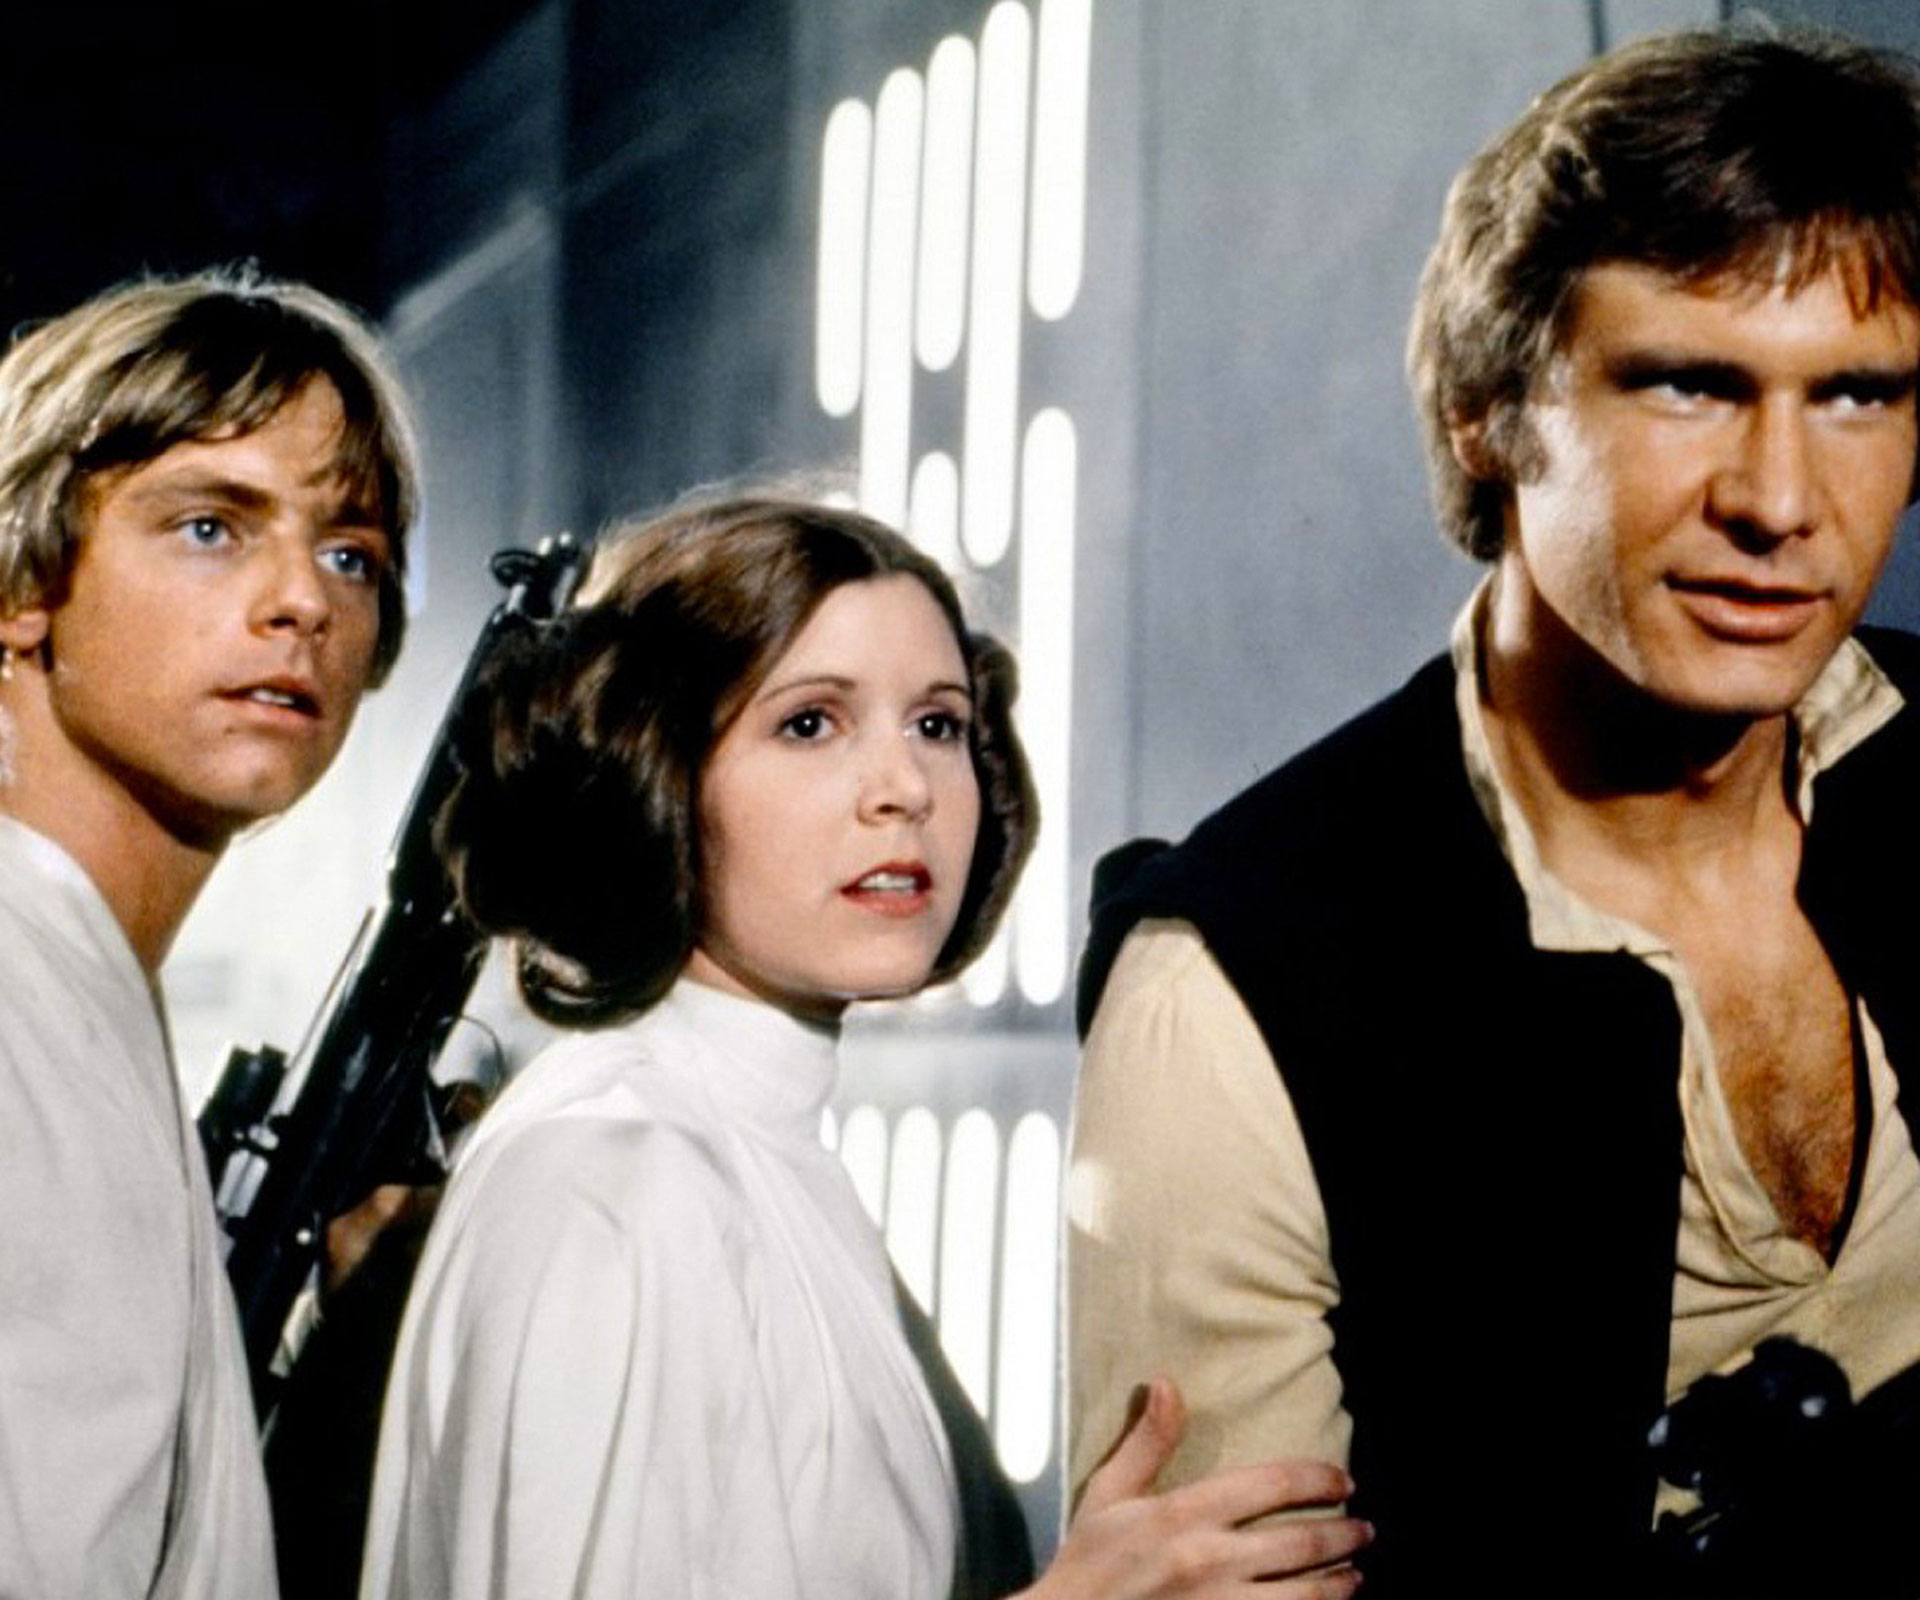 Star Wars stars: Where are they now?